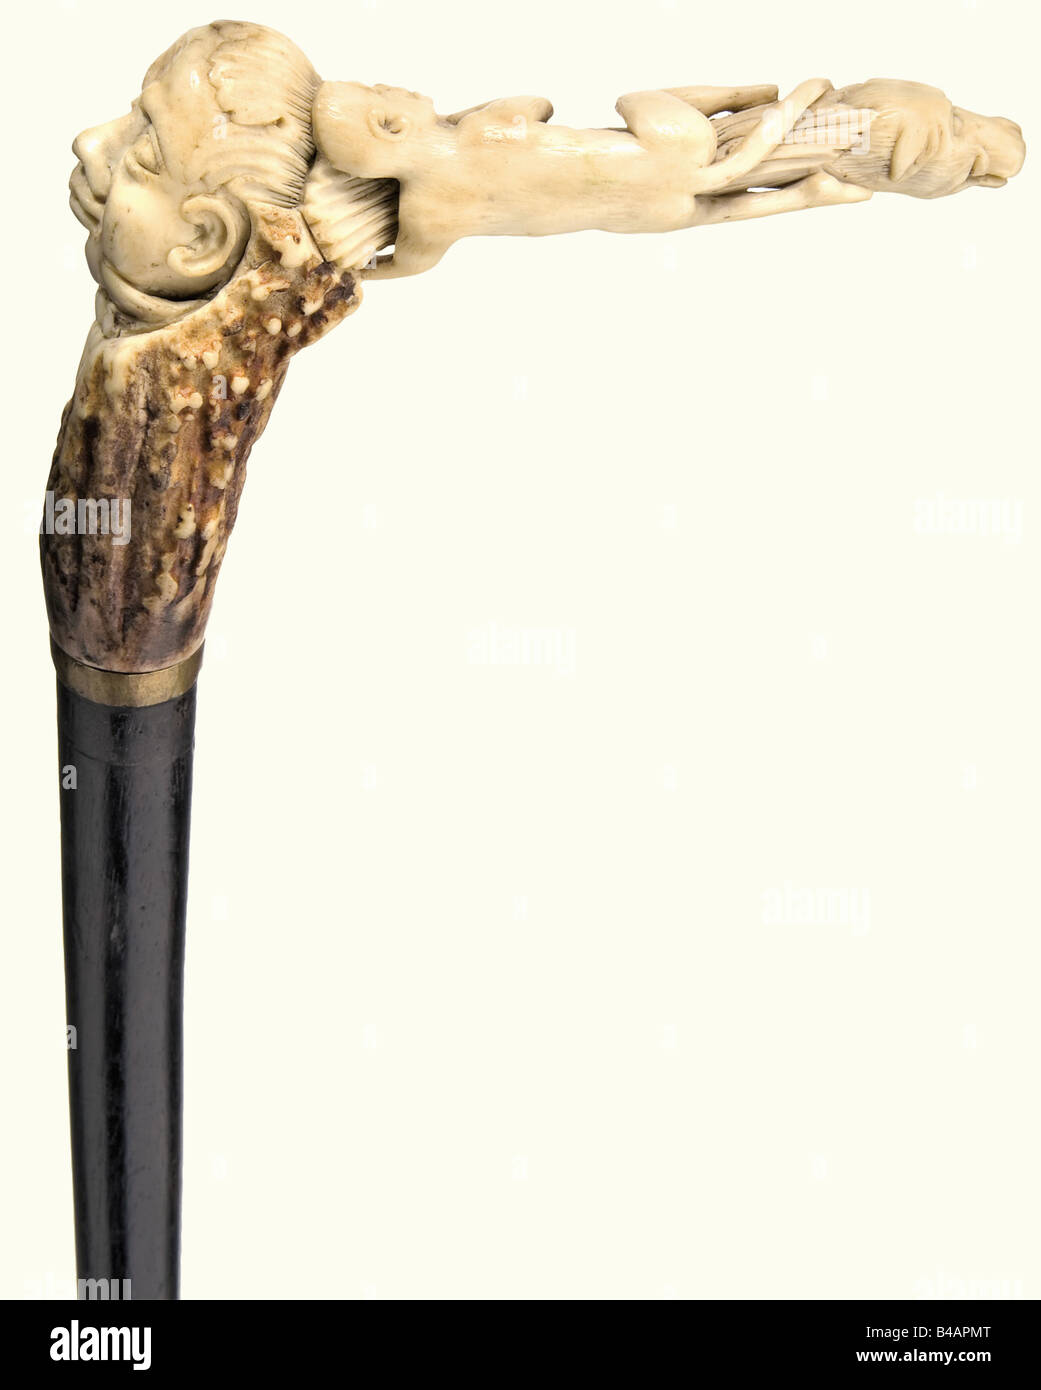 A walking stick, German, circa 1830 Carved staghorn crook handle. The pommel carved in the shape of a man's head with a stiff collar. The crook with apes and lizards terminates in a wild boar's head. Cane of ebonized wood with brass collar and ferrule. Length 91 cm. historic, historical, 19th century, handicrafts, handcraft, craft, object, objects, stills, clipping, clippings, cut out, cut-out, cut-outs, fine arts, art, artful, Stock Photo